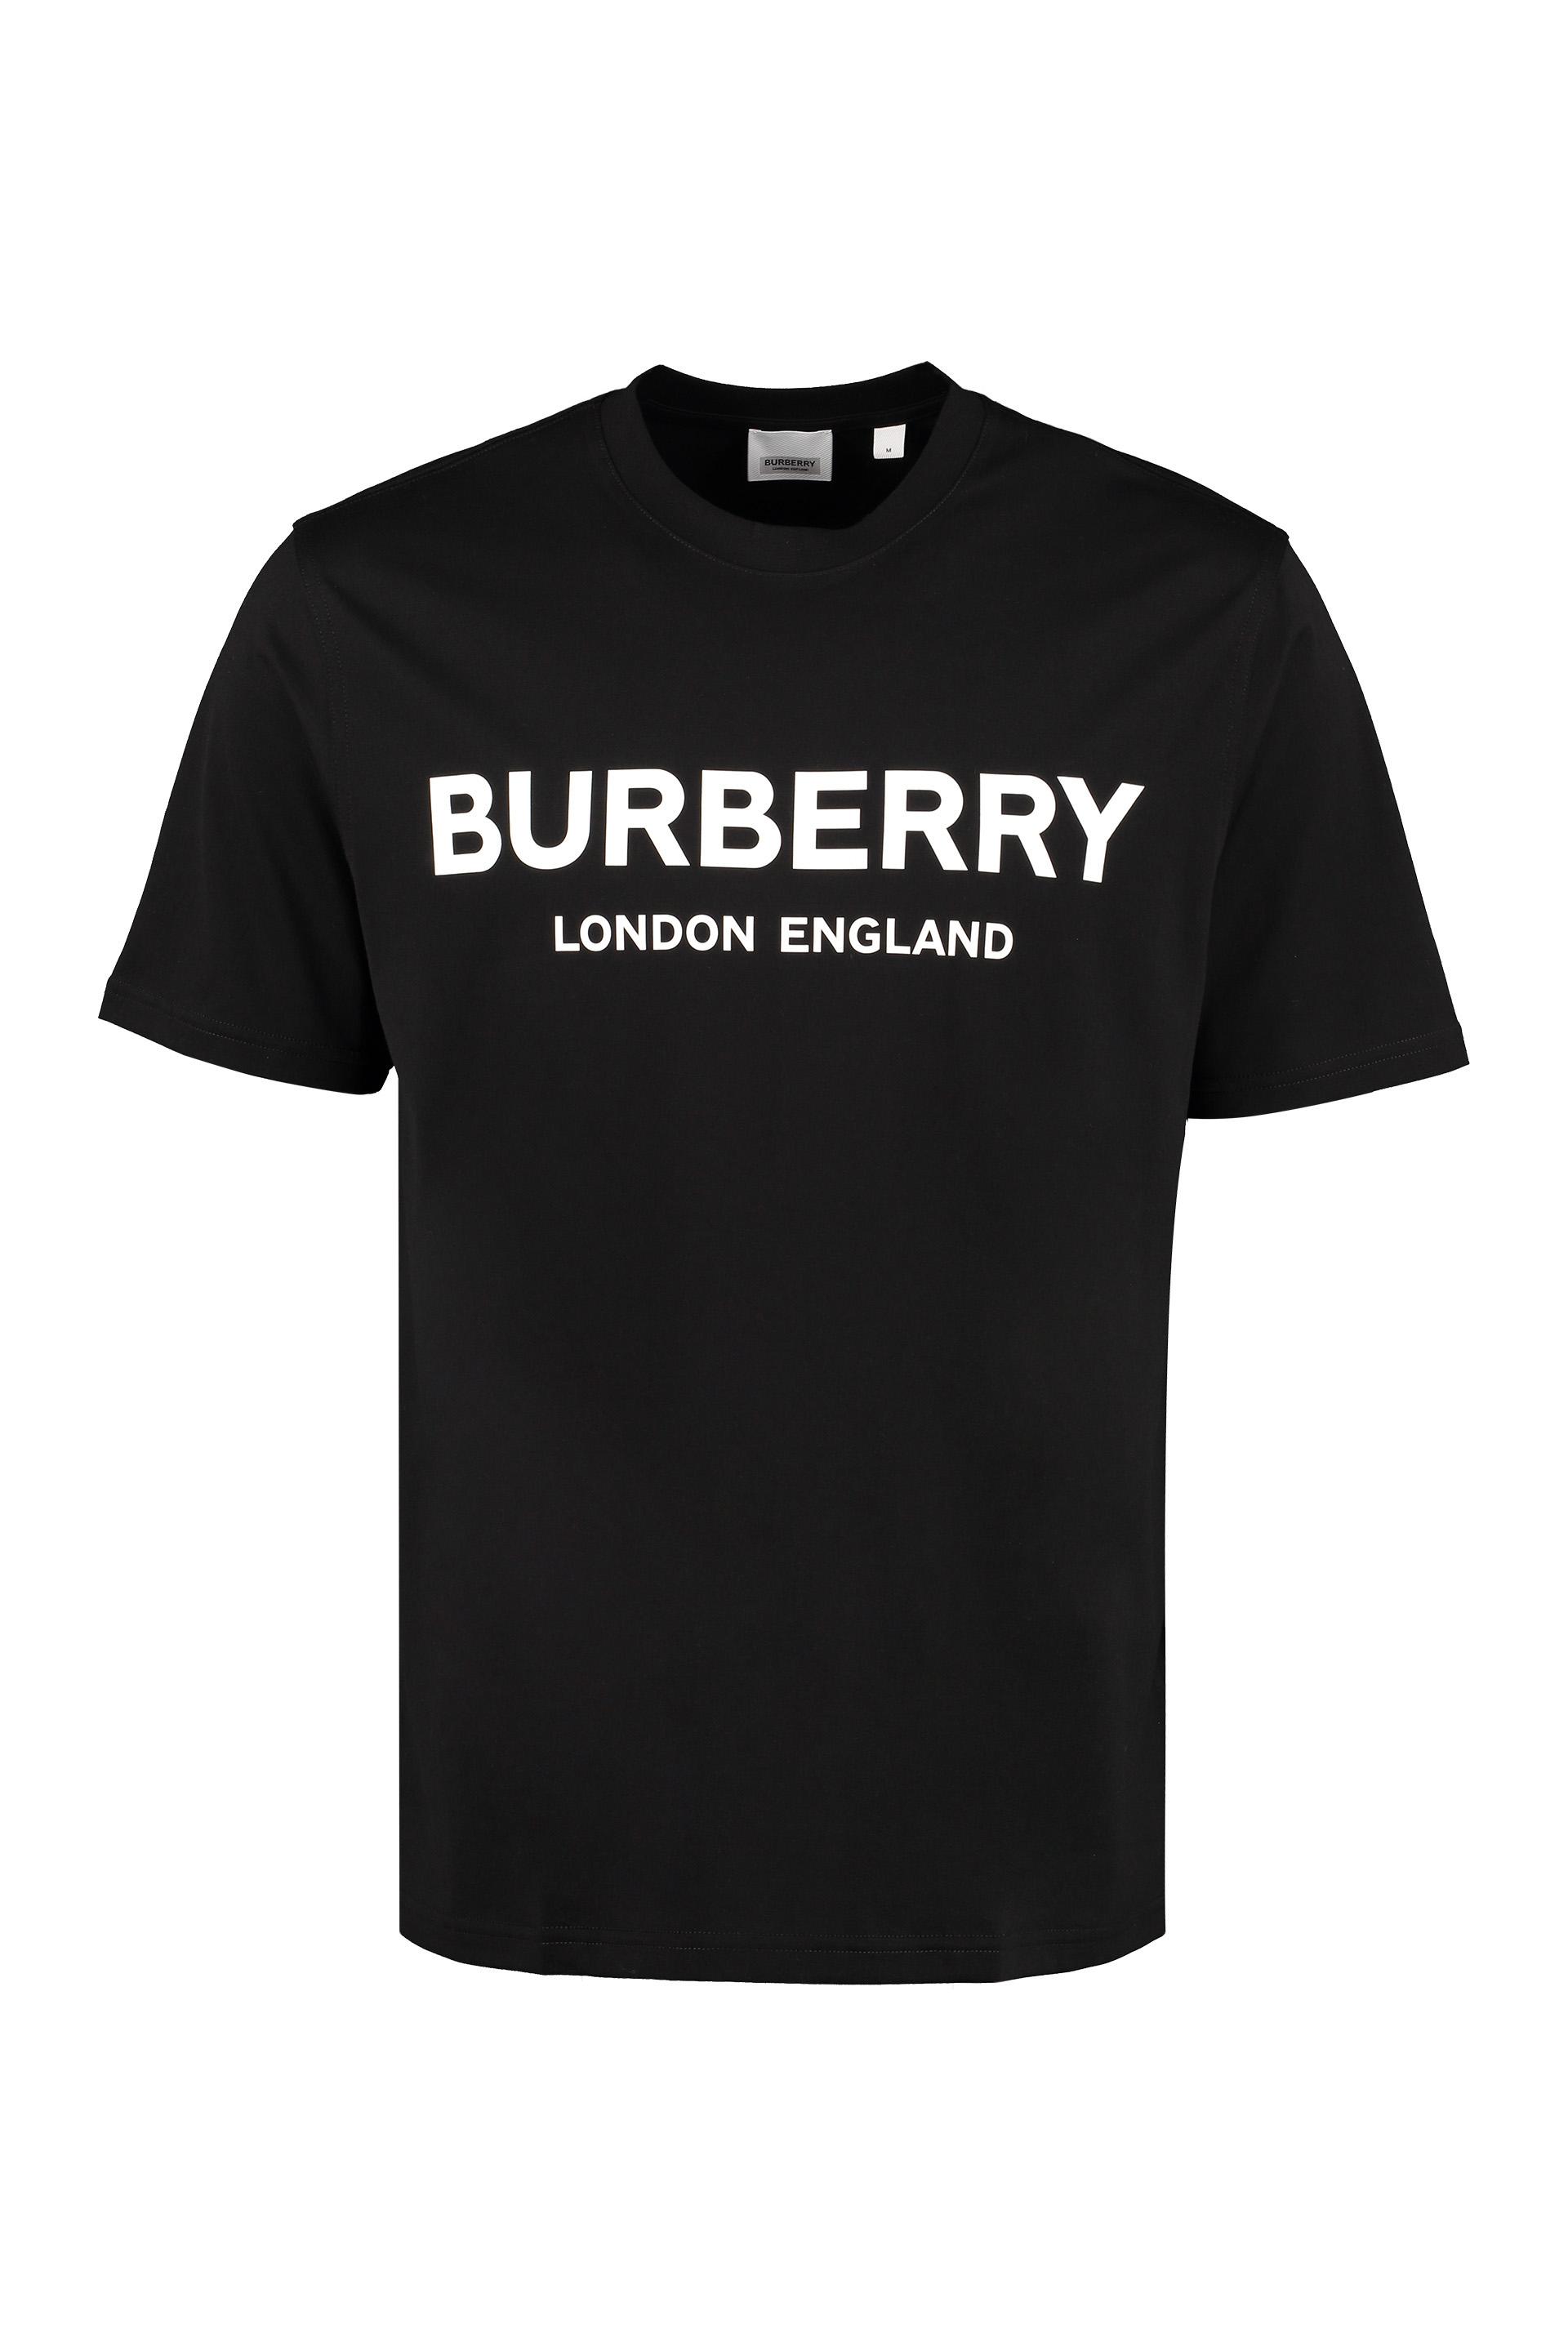 Burberry Logo Print Cotton T Shirt in Black for Men - Save 67% | Lyst